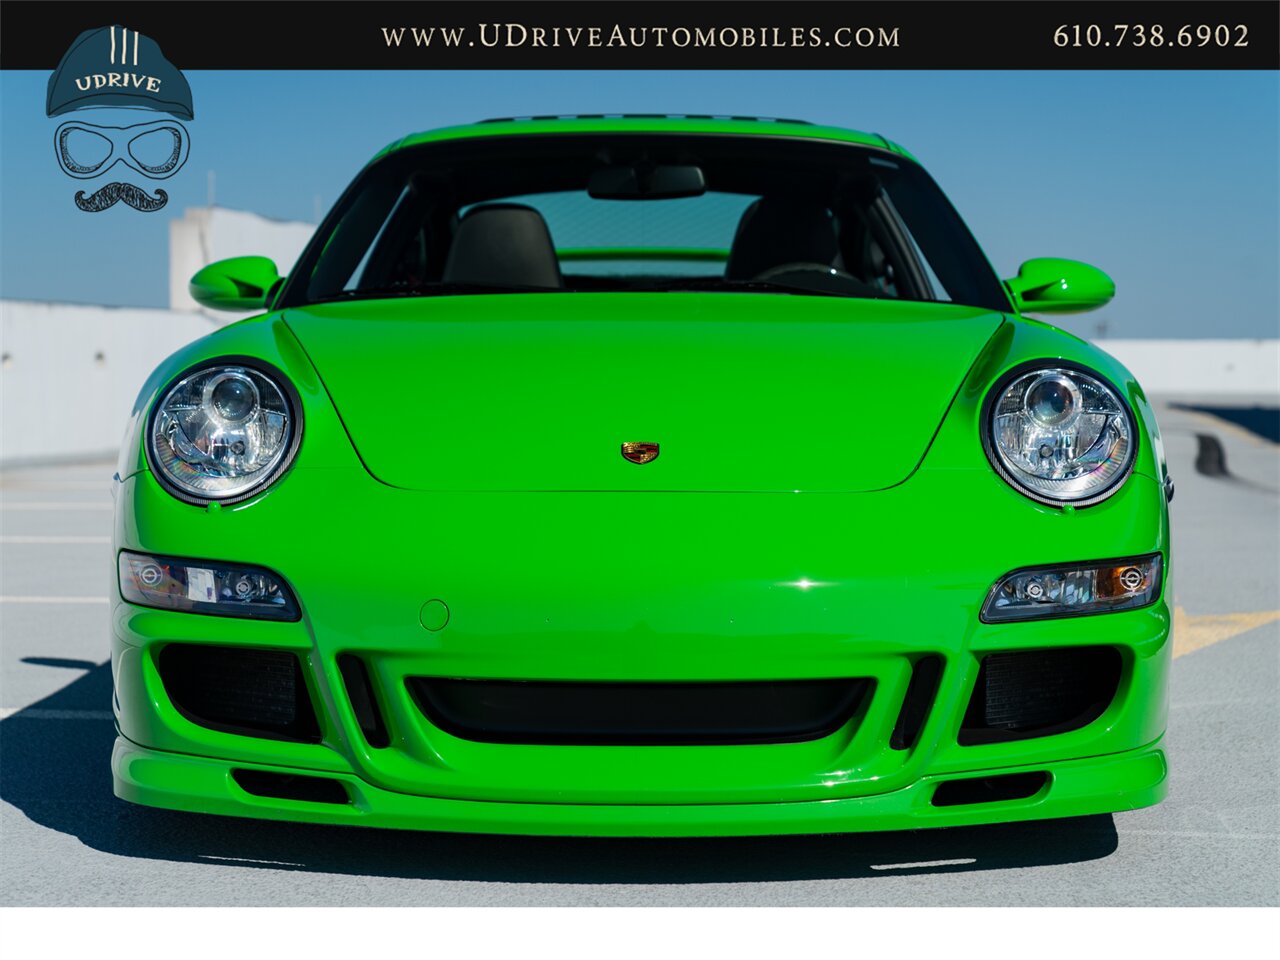 2006 Porsche 911 Carrera 4S  997 PTS Signal Green 6Sp Sport Sts Spt Chrono Spt Exhst - Photo 14 - West Chester, PA 19382